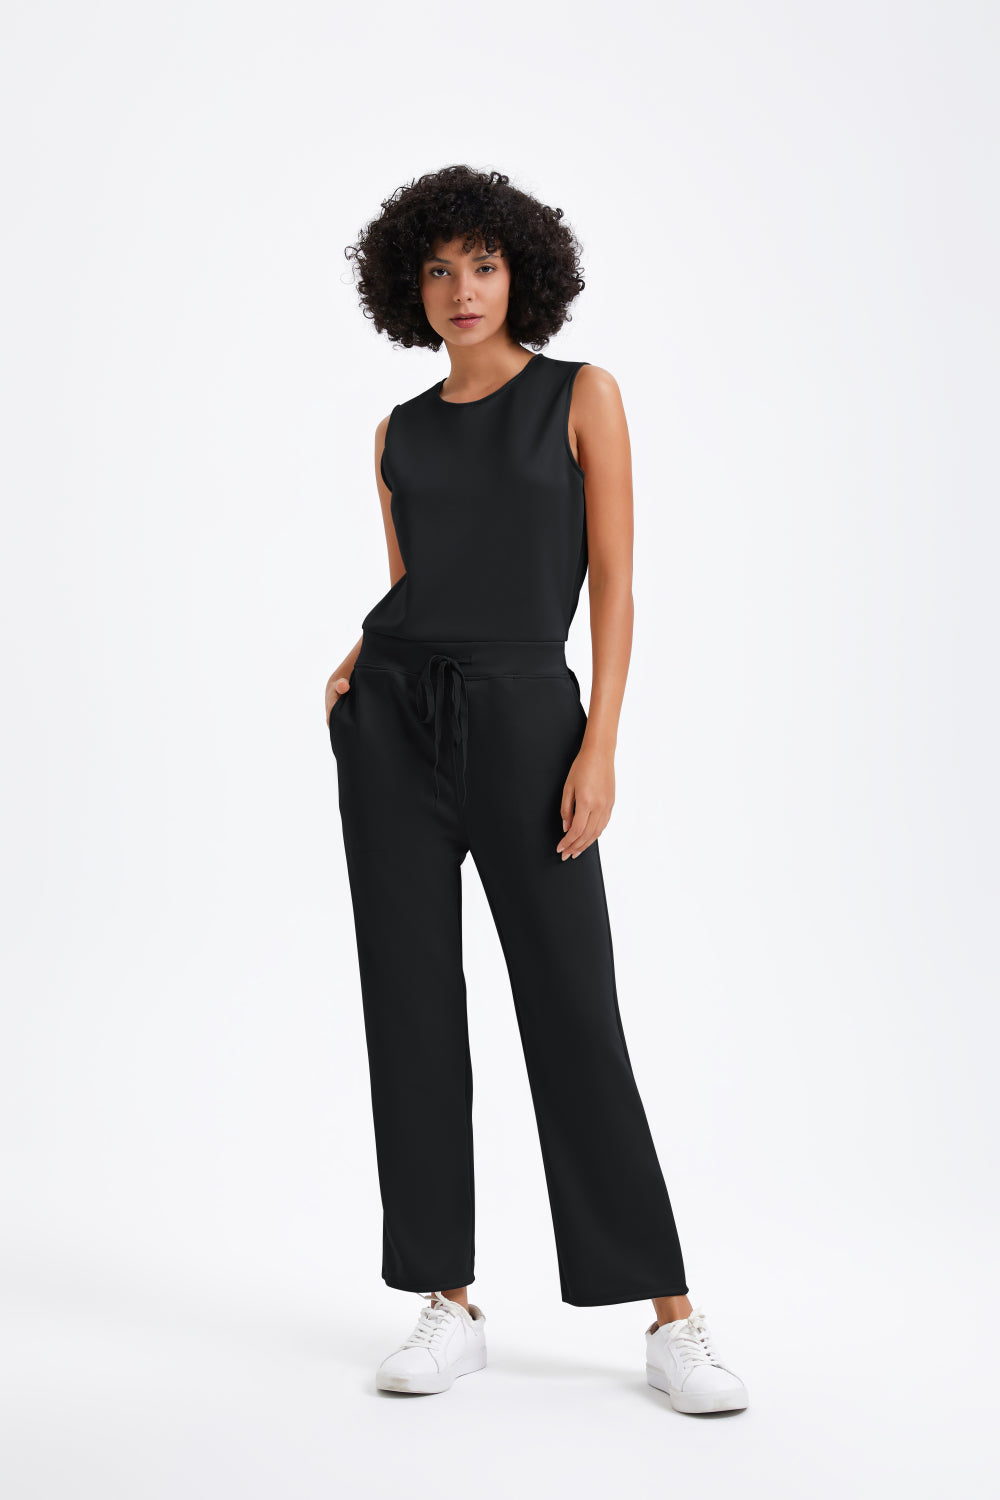 Slim casual women's sleeveless solid color v-neck trousers jumpsuit - Buy two and get free shipping!